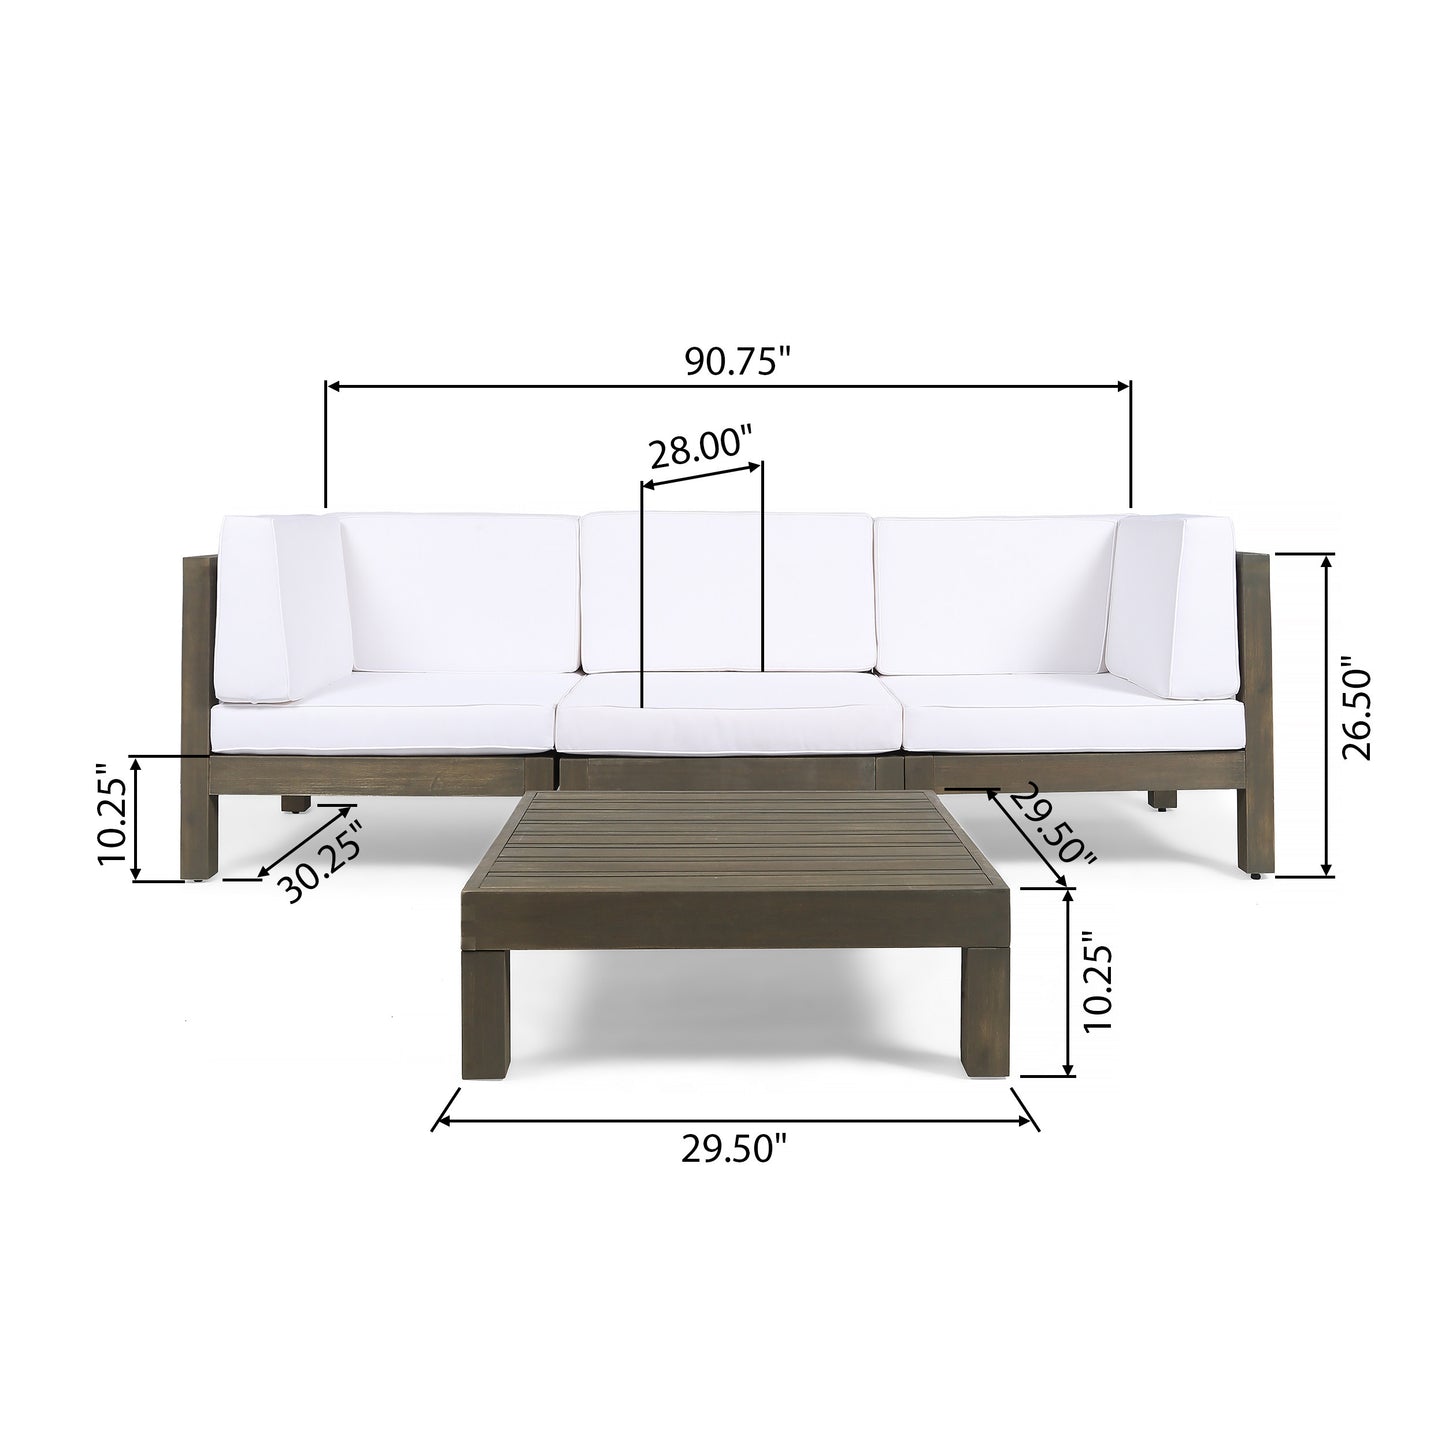 Dawson Outdoor Sectional Sofa Set with Coffee Table - 4-Piece 3-Seater - Acacia Wood - Outdoor Cushions